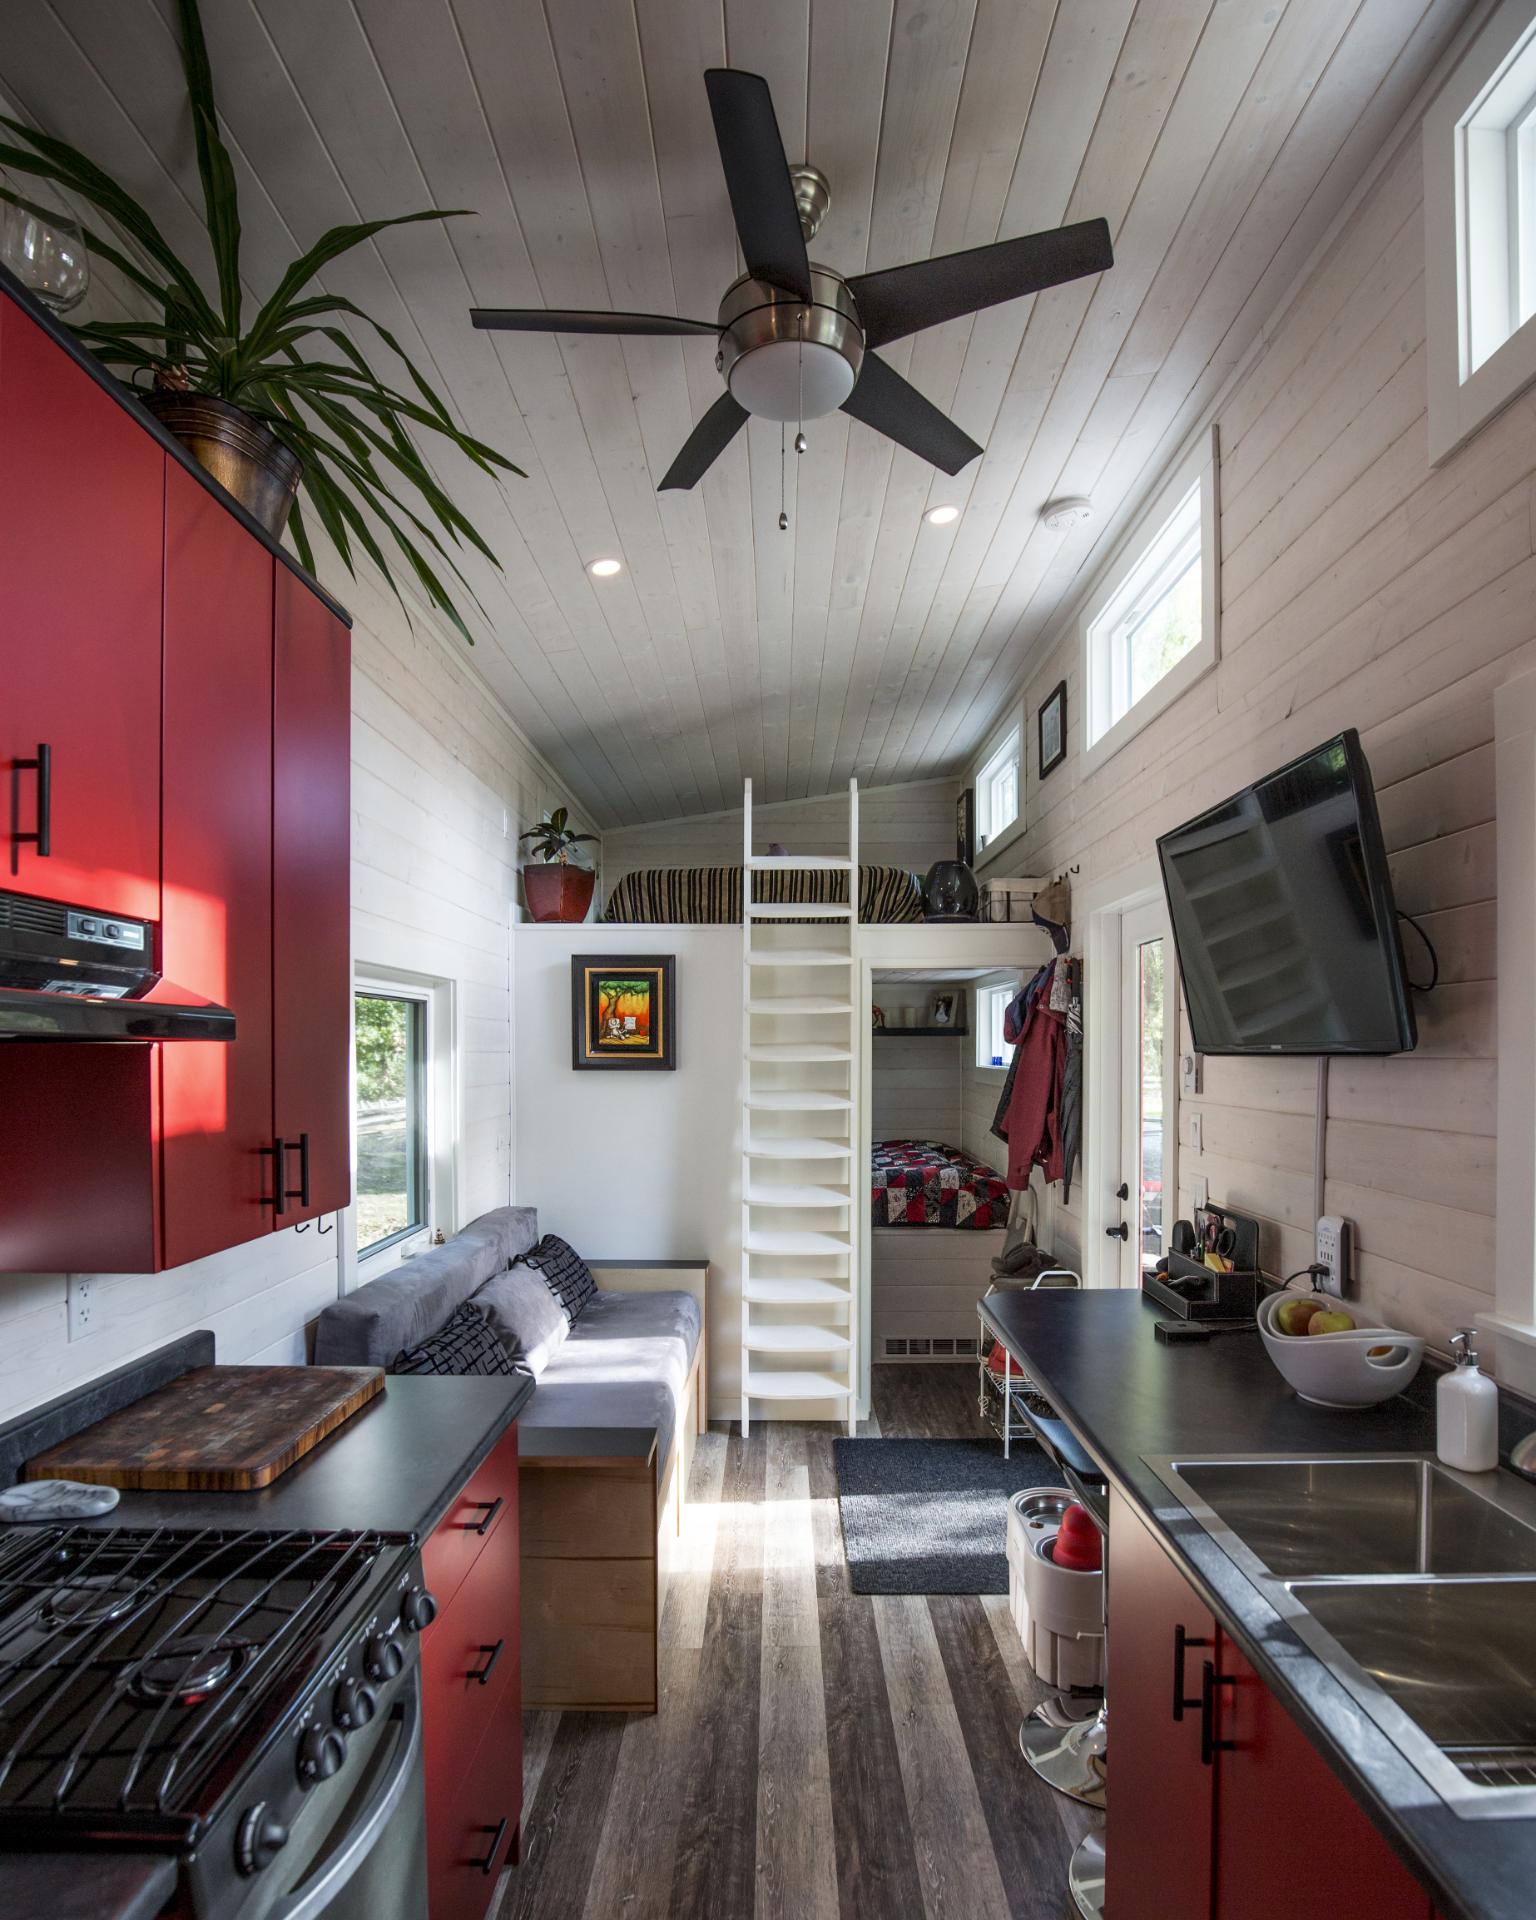 Kitchen and Living Room with Ceiling Fan - Simply Heaven by Sunshine Tiny Homes